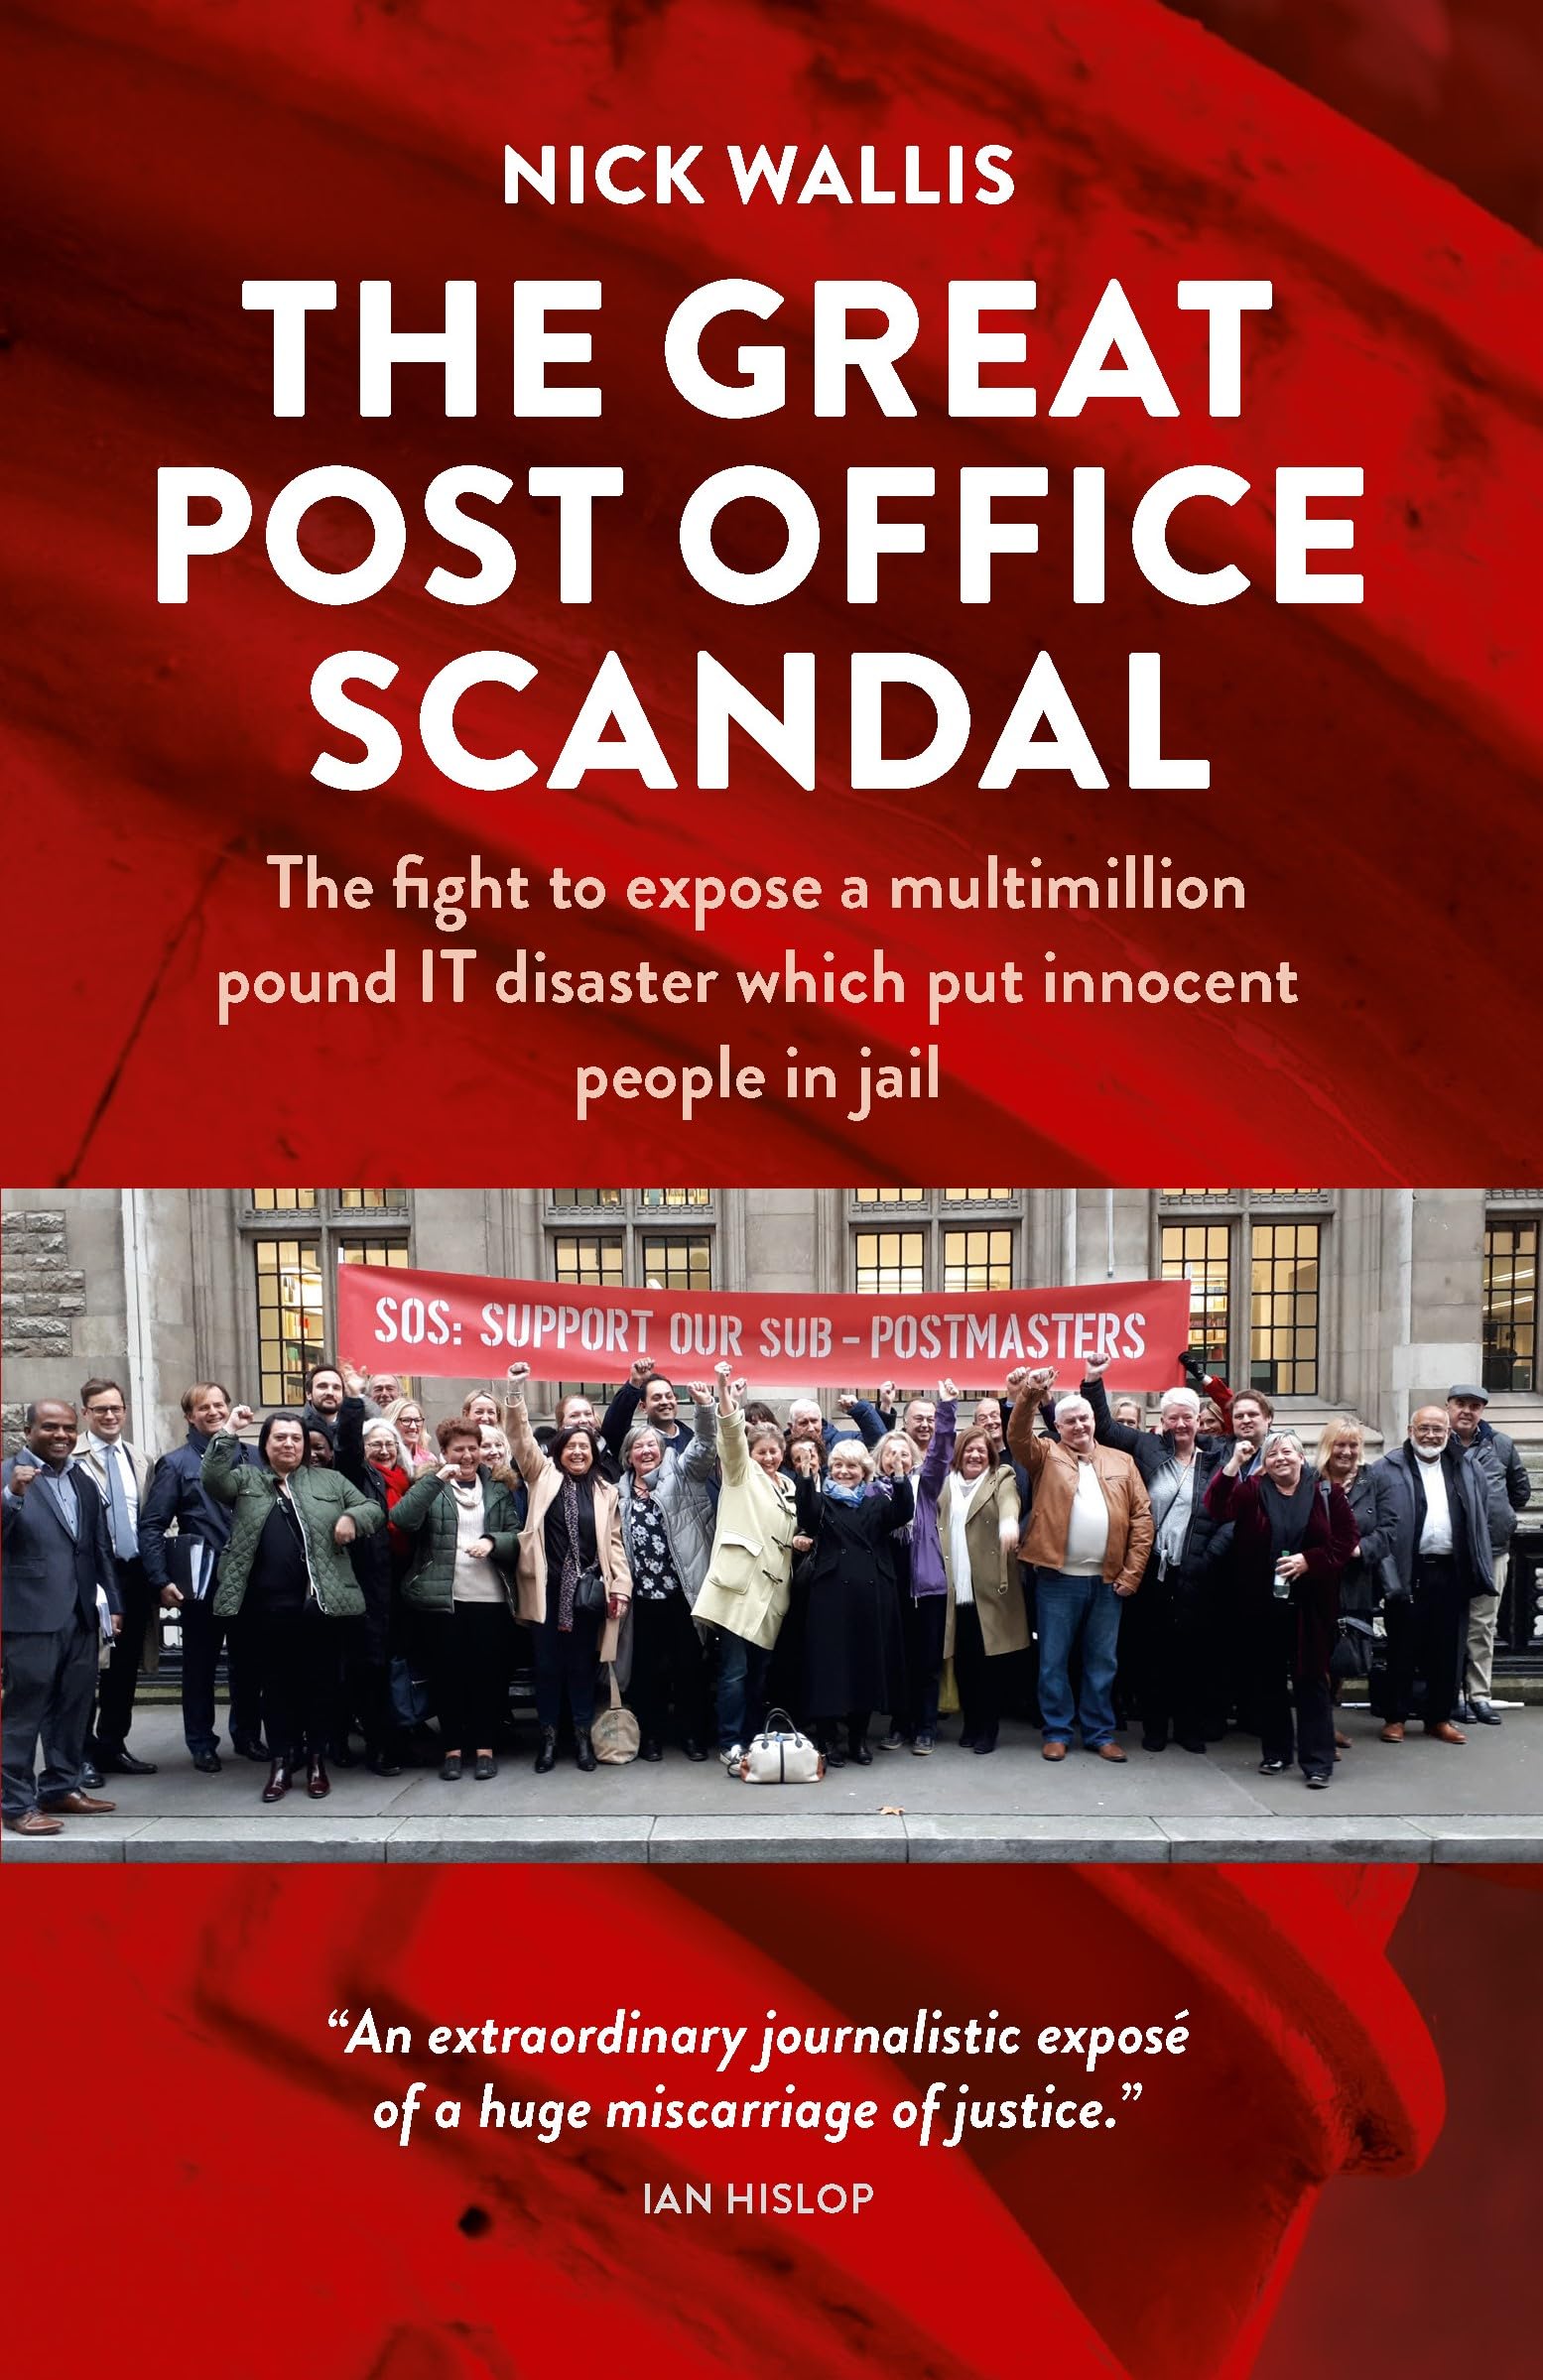 The Great Post Office Scandal: The story of the fight to expose a multimillion pound IT disaster which put innocent people in jail